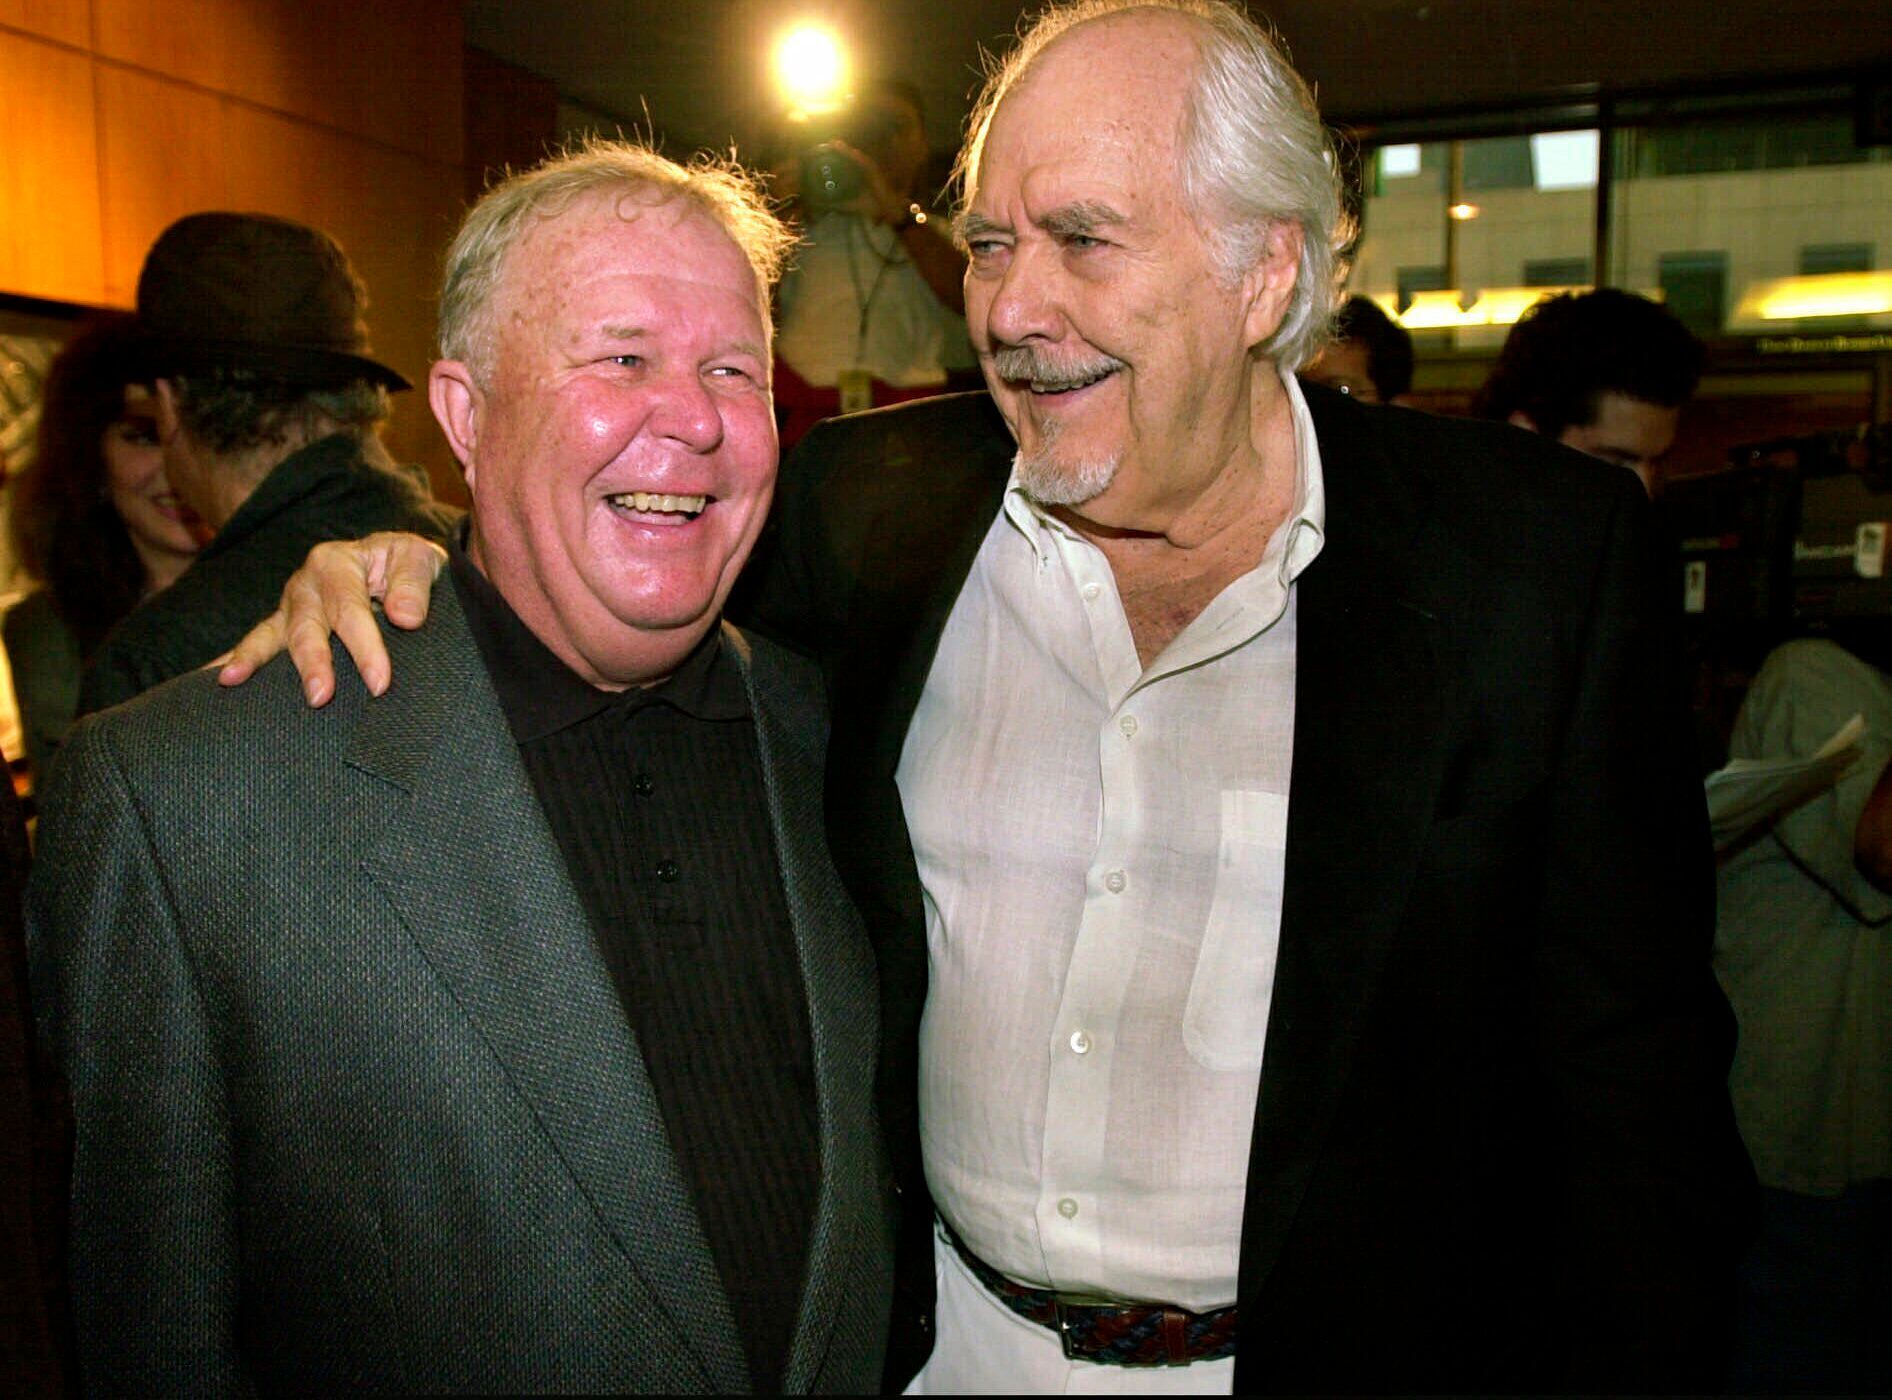 Ned Beatty, titanic character actor of ‘Network,’ dies at 83